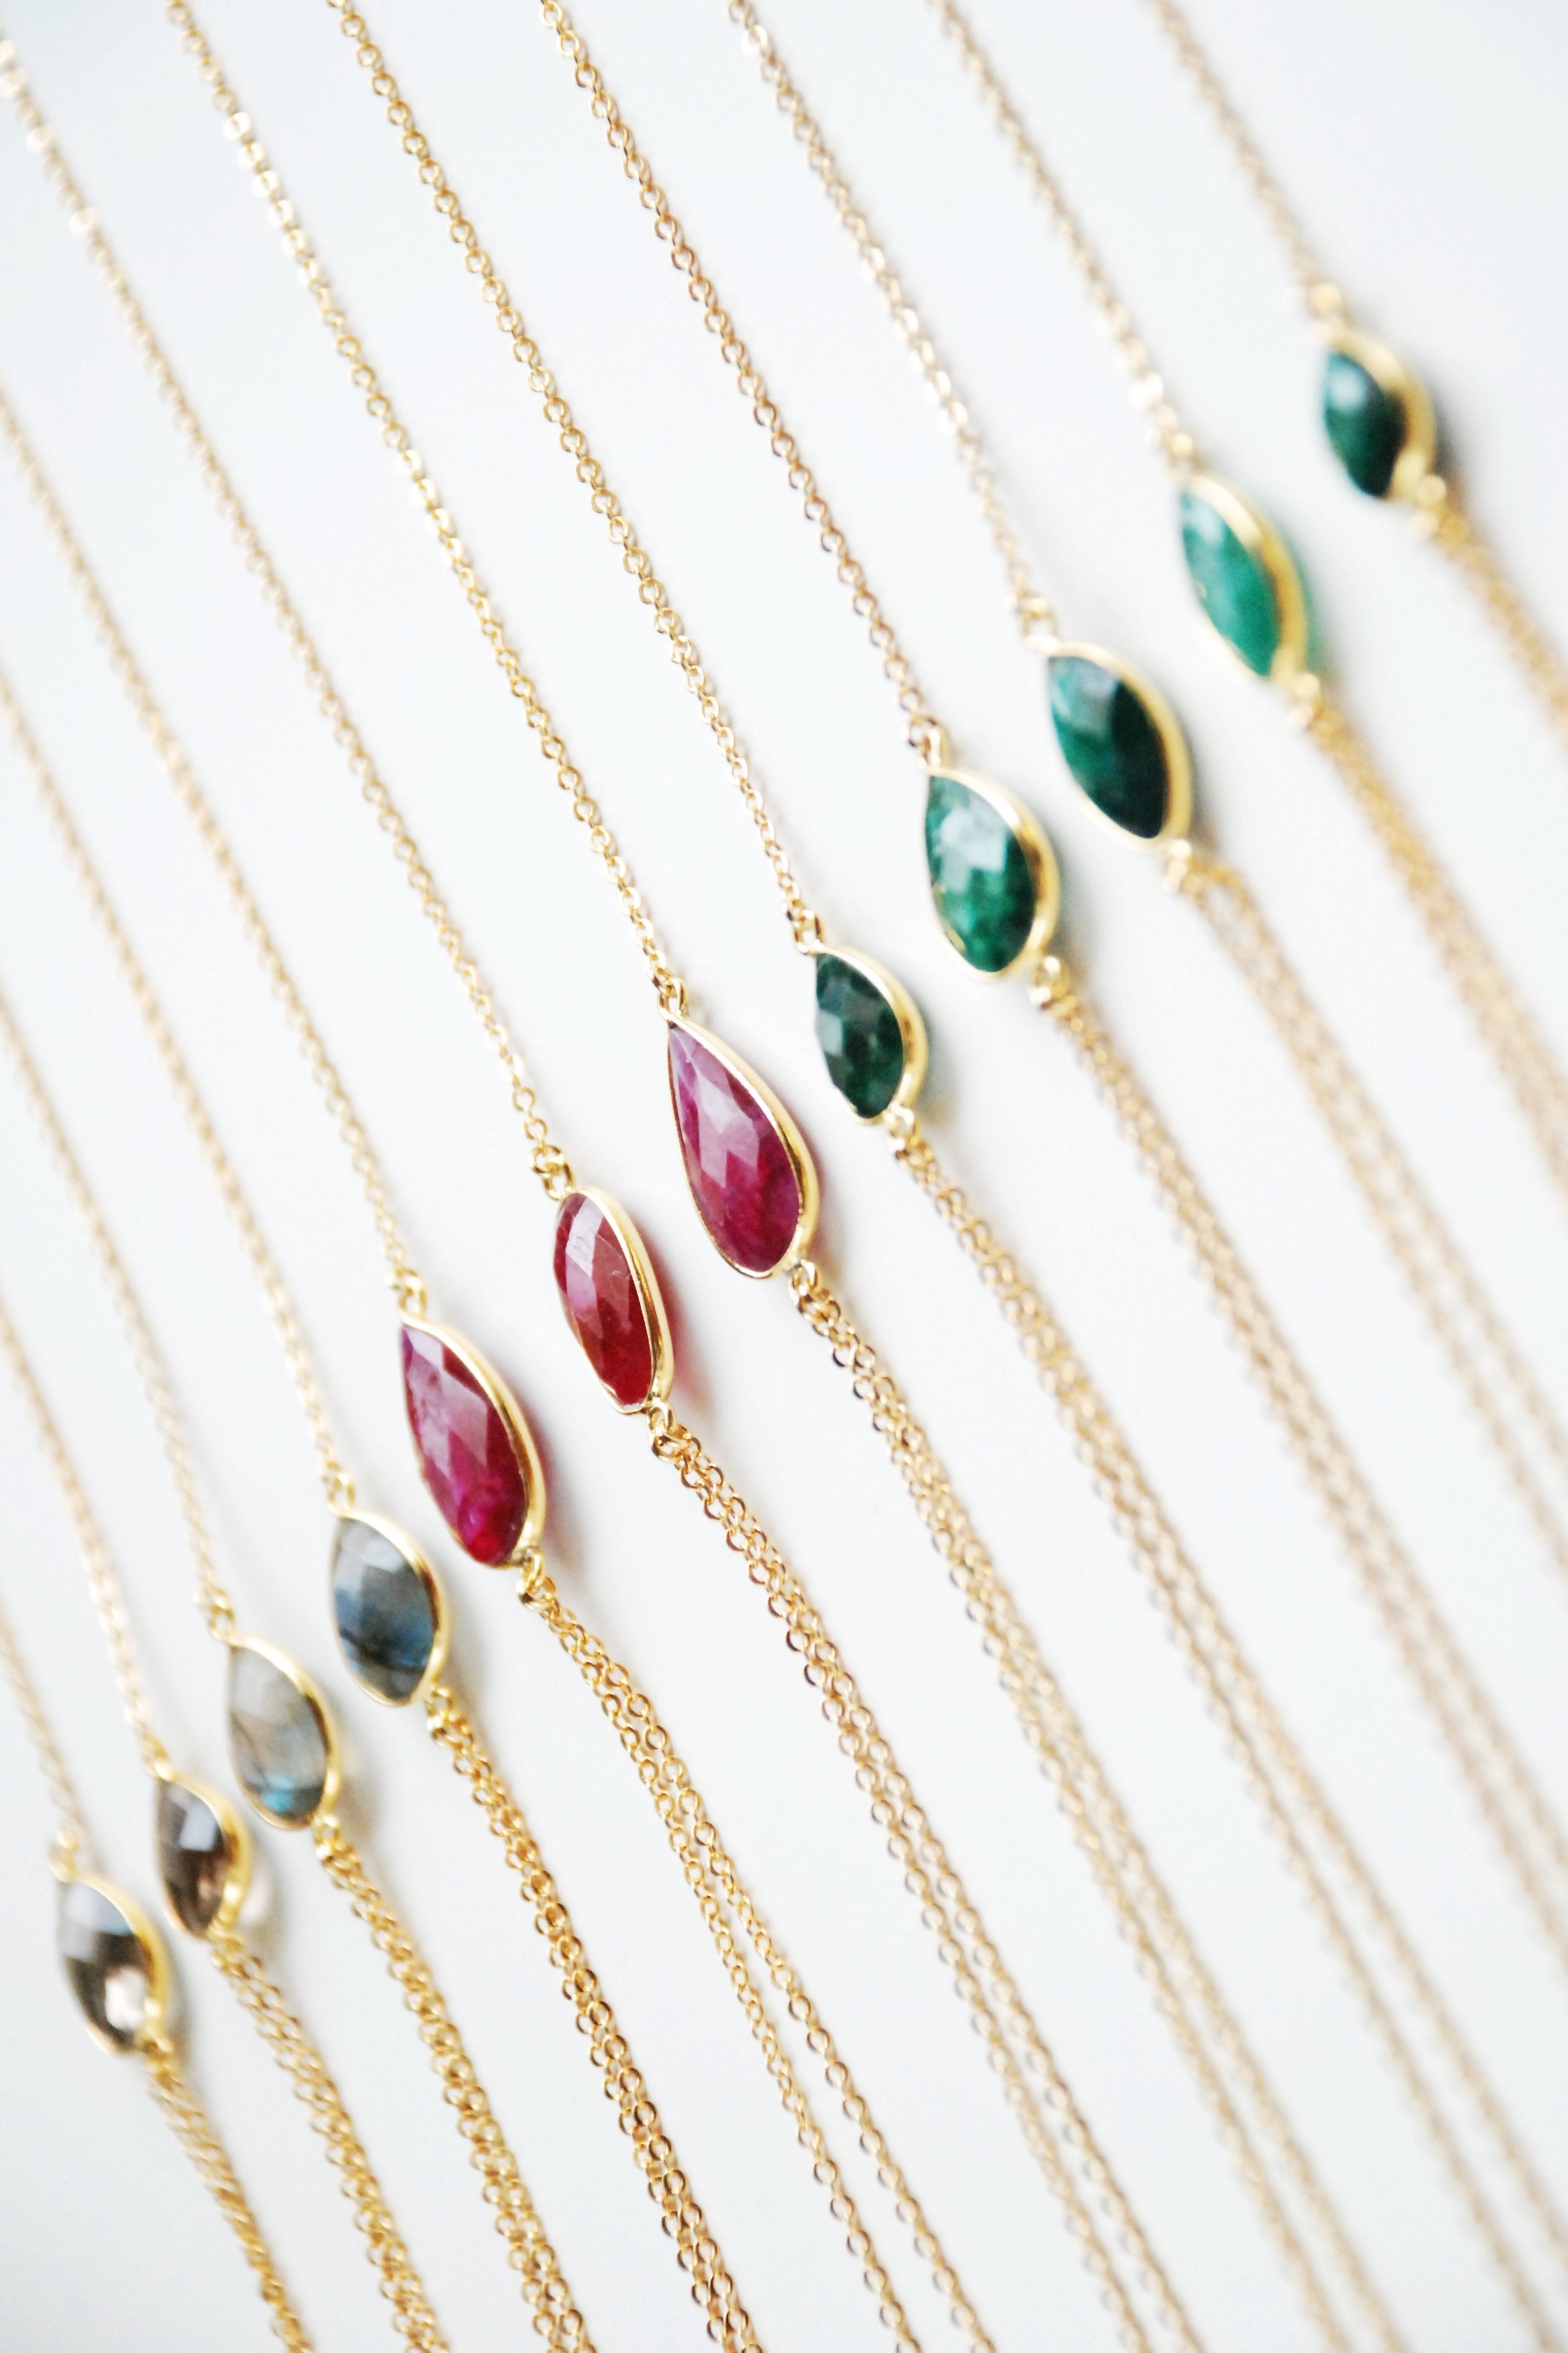 Precious Stones Lariat Necklaces - Boutique Minimaliste has waterproof, durable, elegant and vintage inspired jewelry